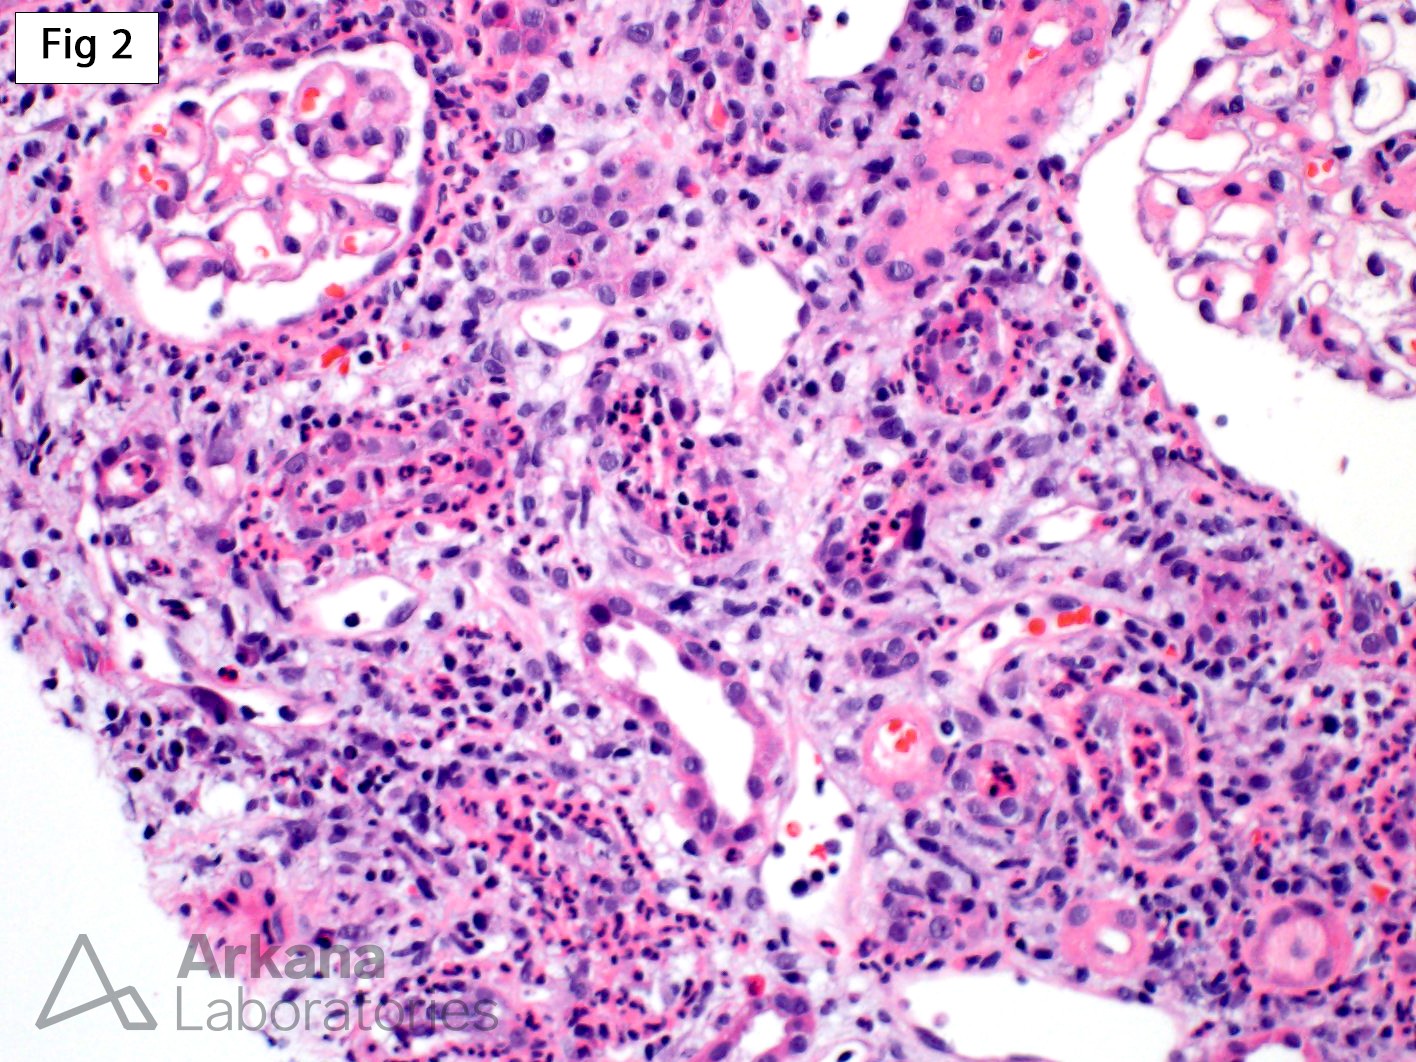 Acute Pyelonephritis, severe neutrophilic inflammation associated with remarkable rimming of the tubules, neutrophilic tubulitis and neutrophilic casts